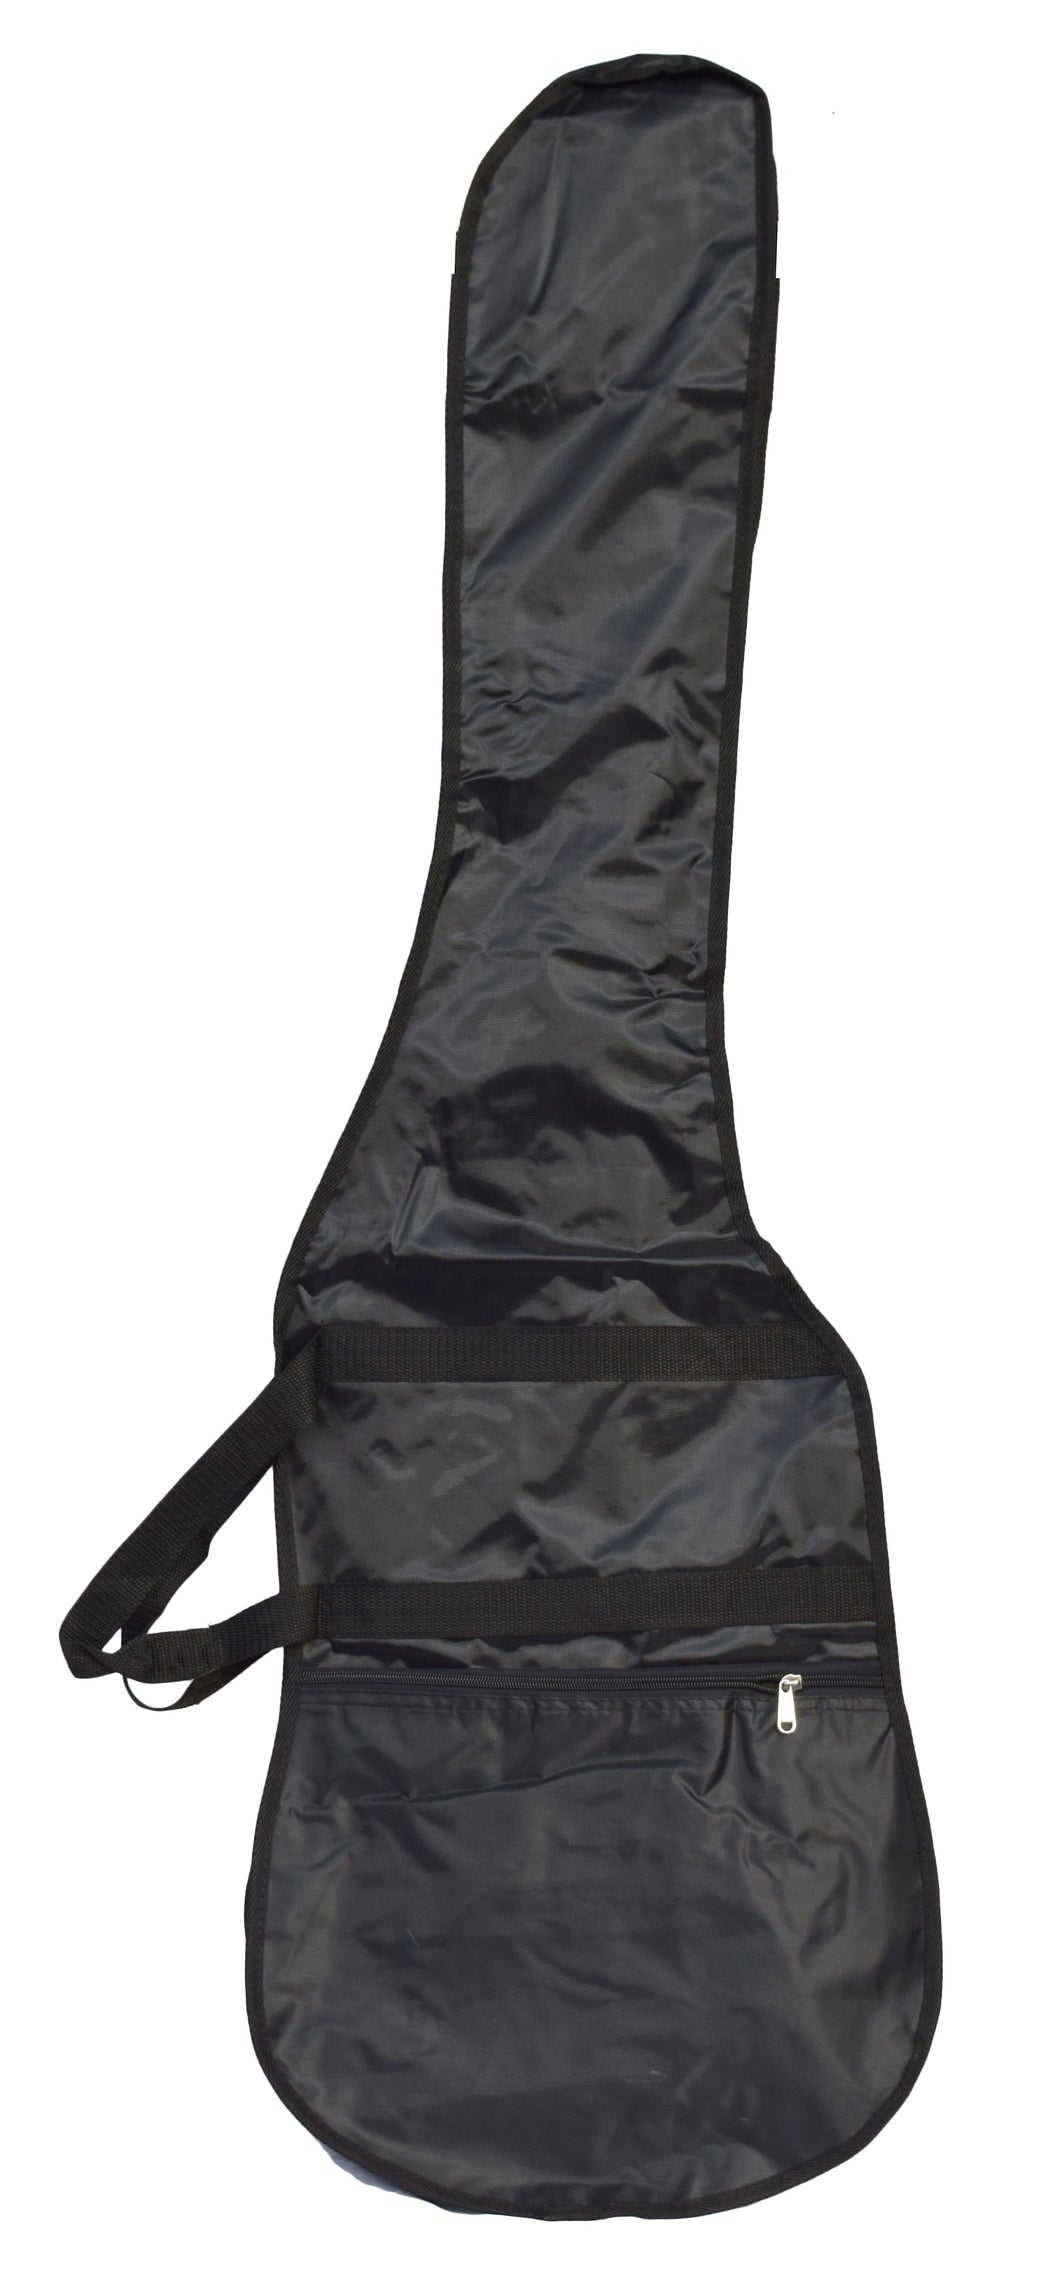 Carrying Bag For Bass Guitar Full Size-(6778236534978)